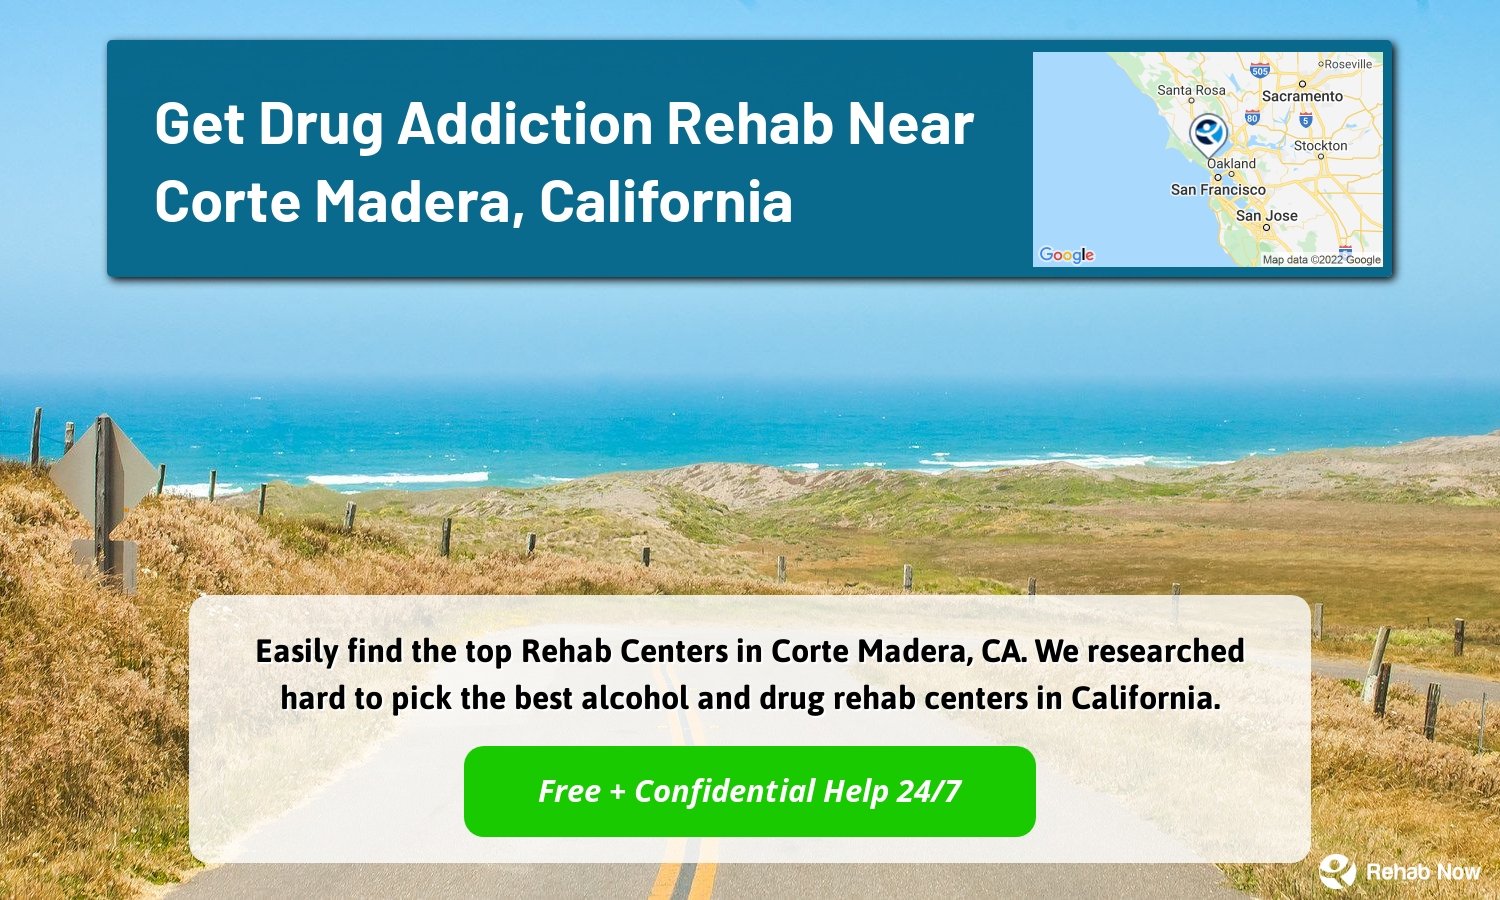 Easily find the top Rehab Centers in Corte Madera, CA. We researched hard to pick the best alcohol and drug rehab centers in California.